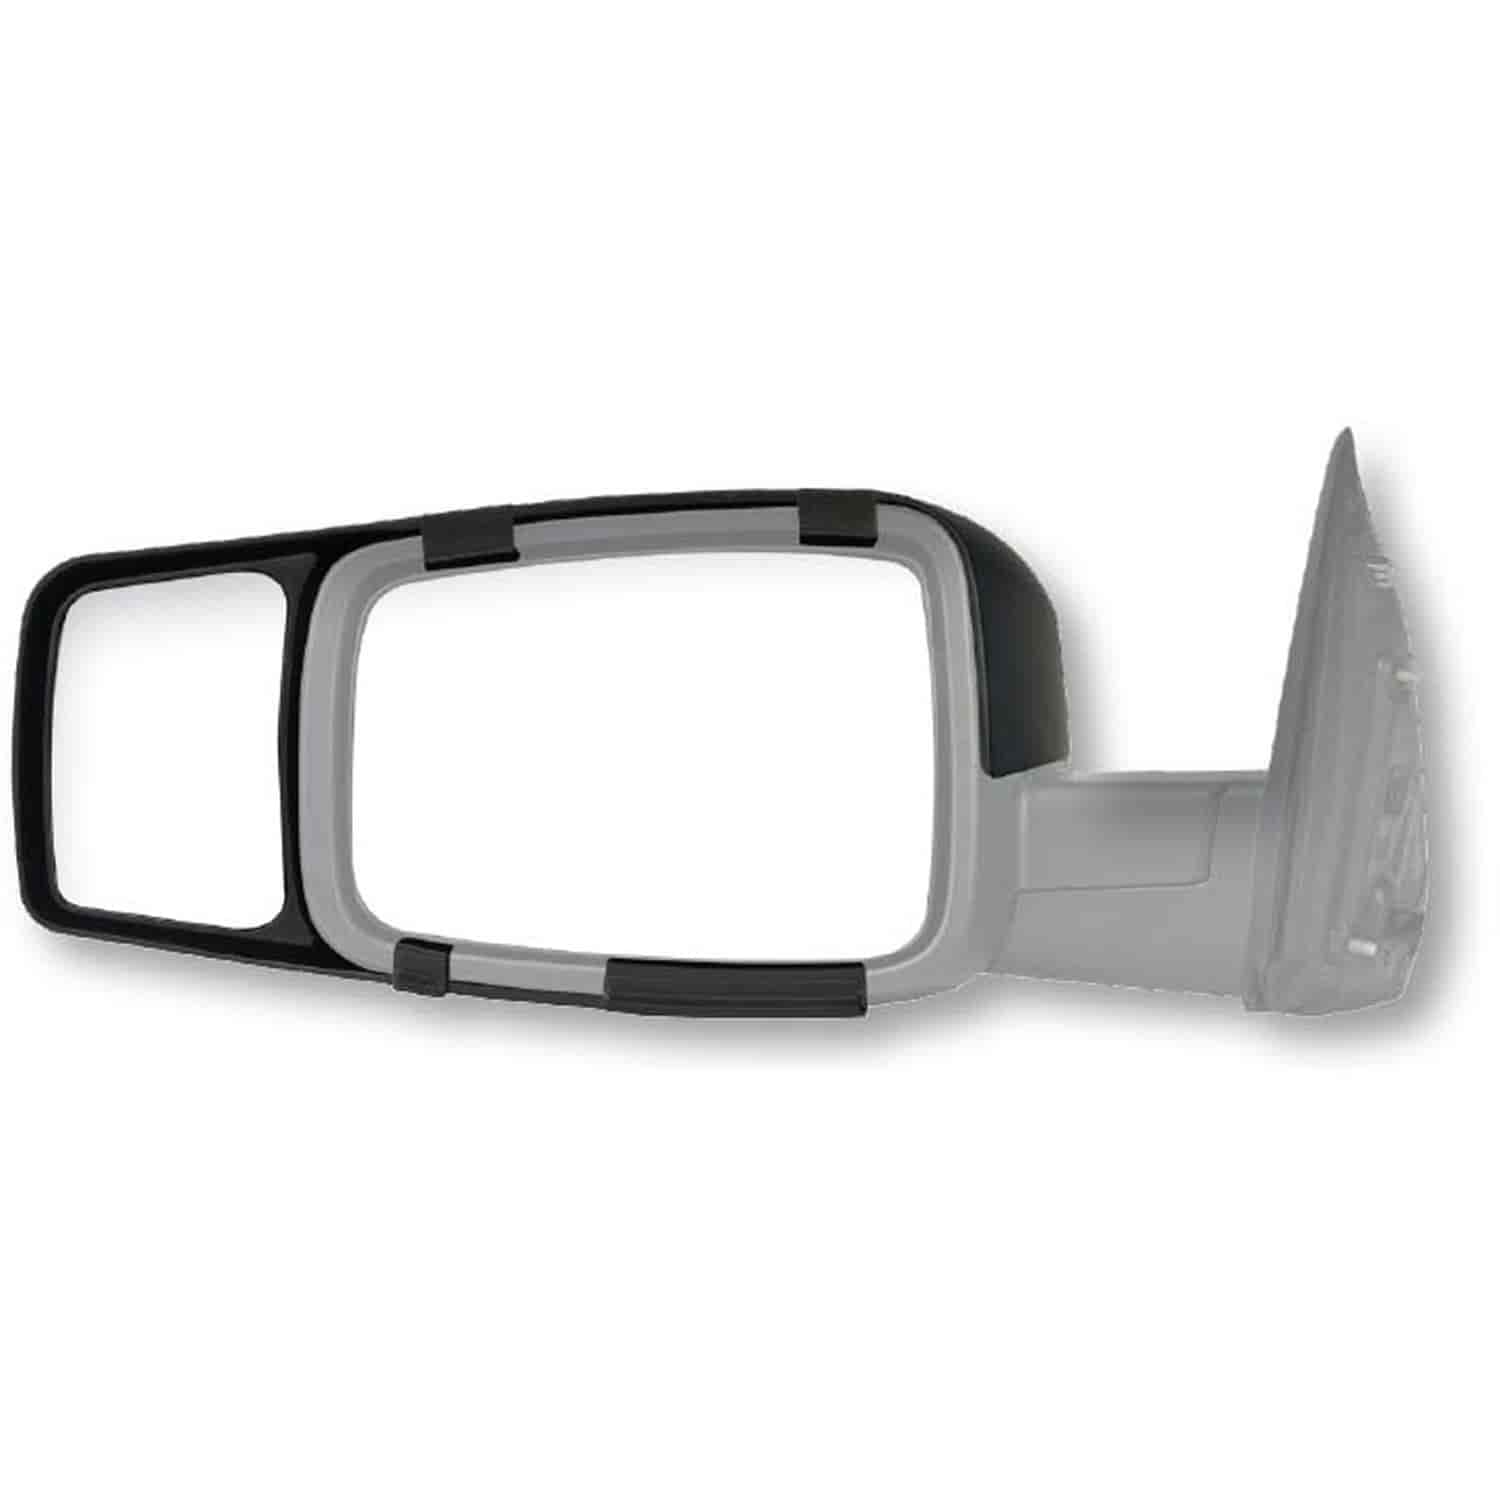 Snap-On Towing Mirrors Fits 2009 to 2014 Ram